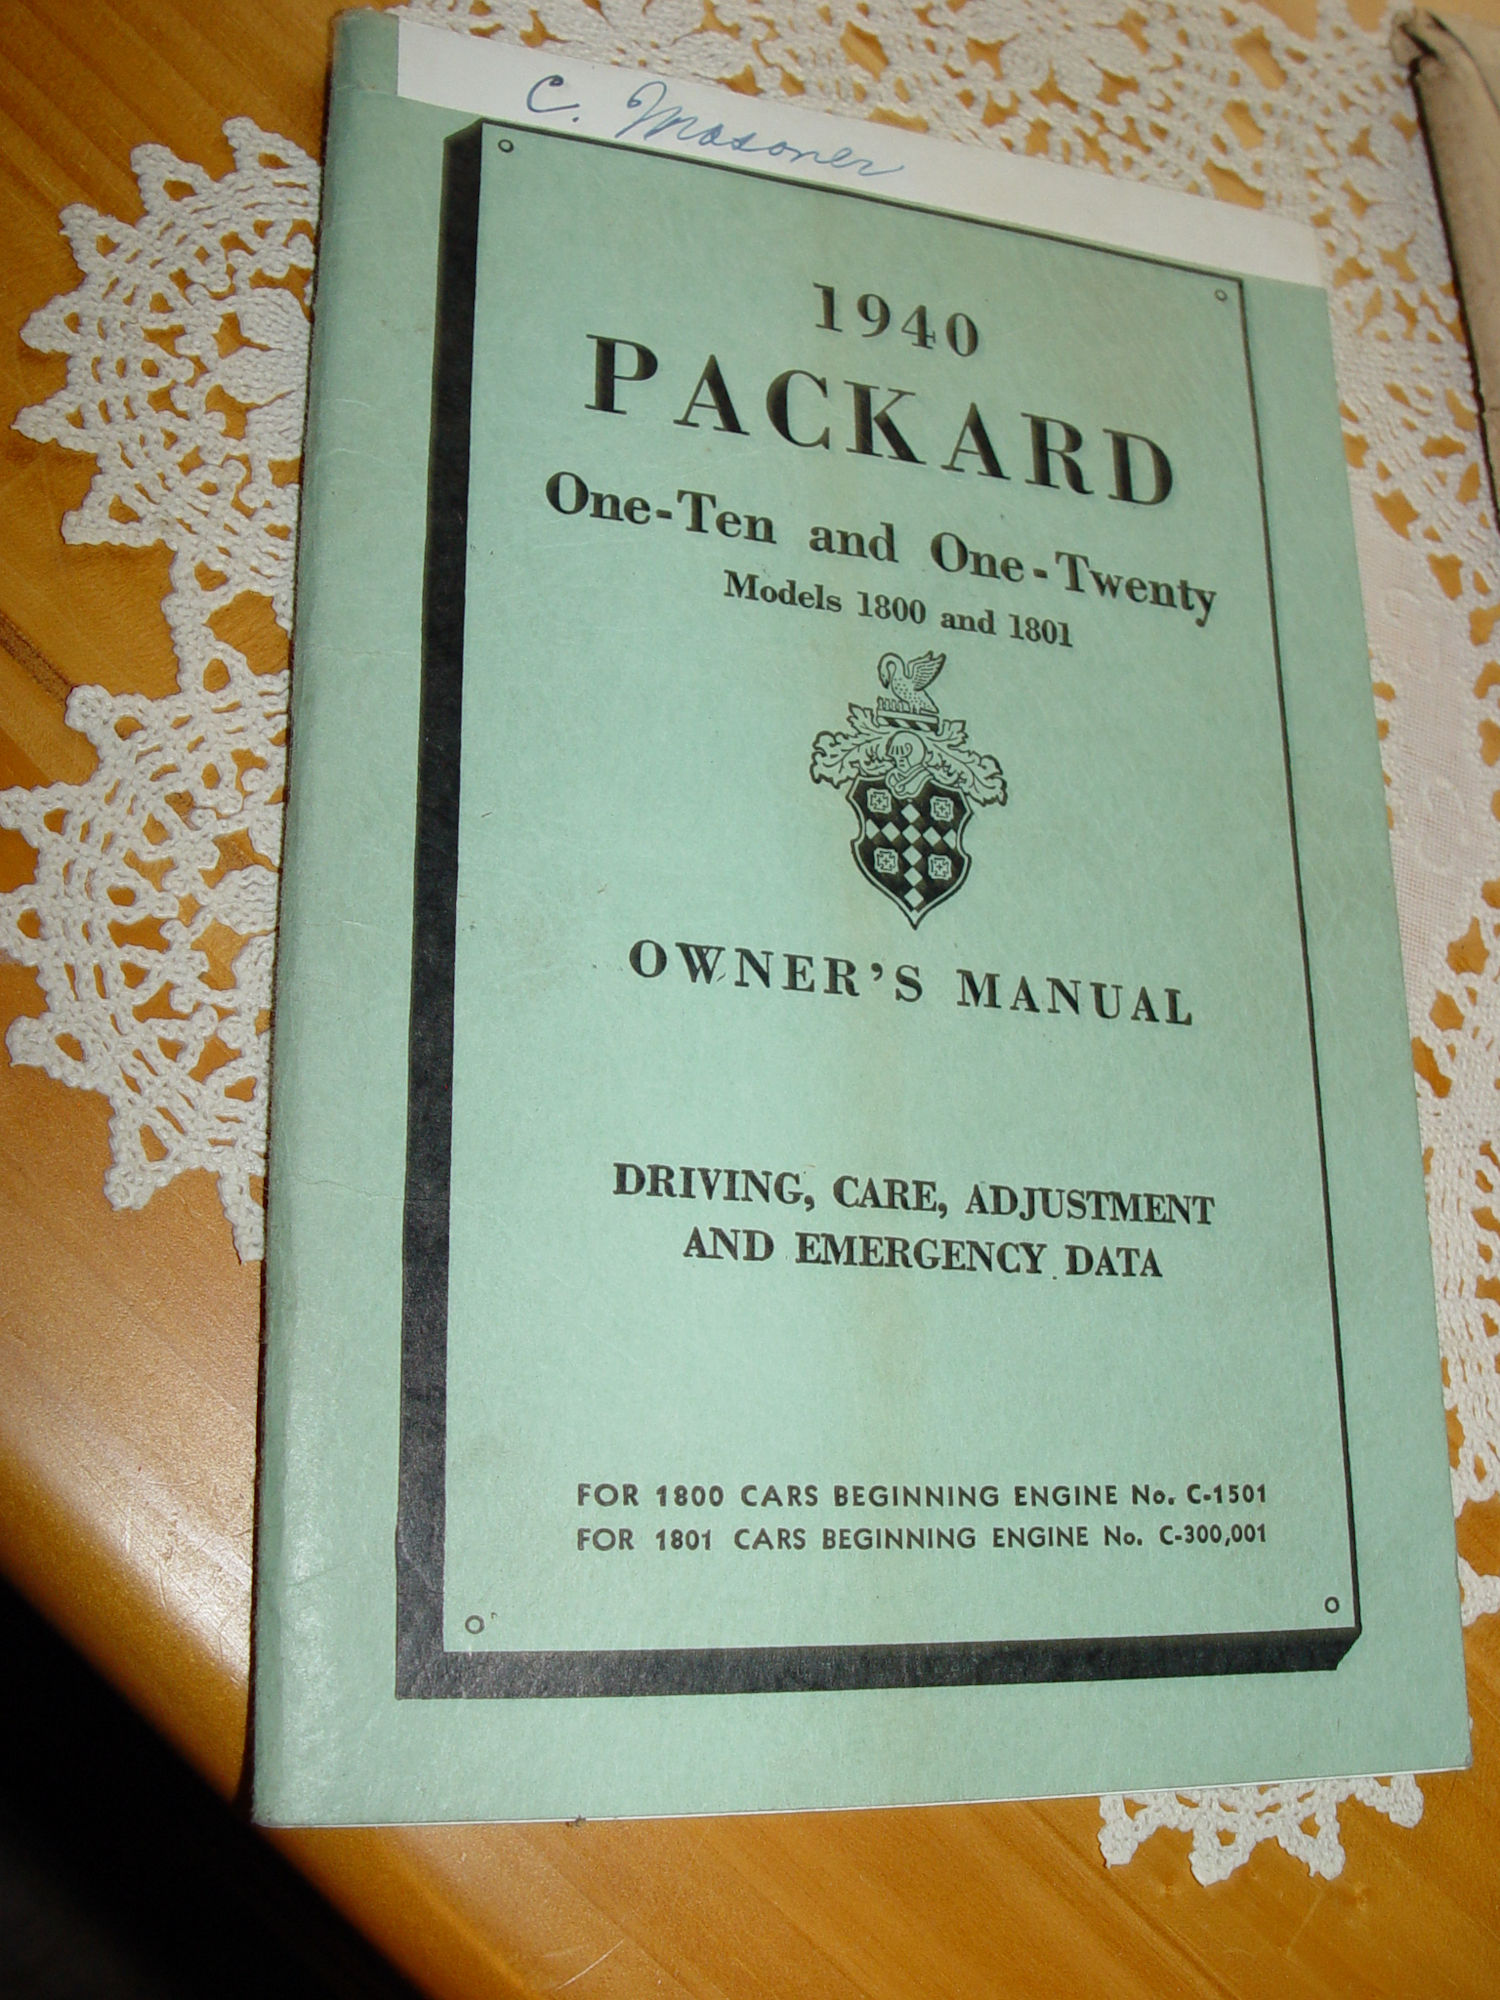 1940 Packard
                        Owner's Manual; One-Ten and One-Twenty Models
                        1800 and 1801